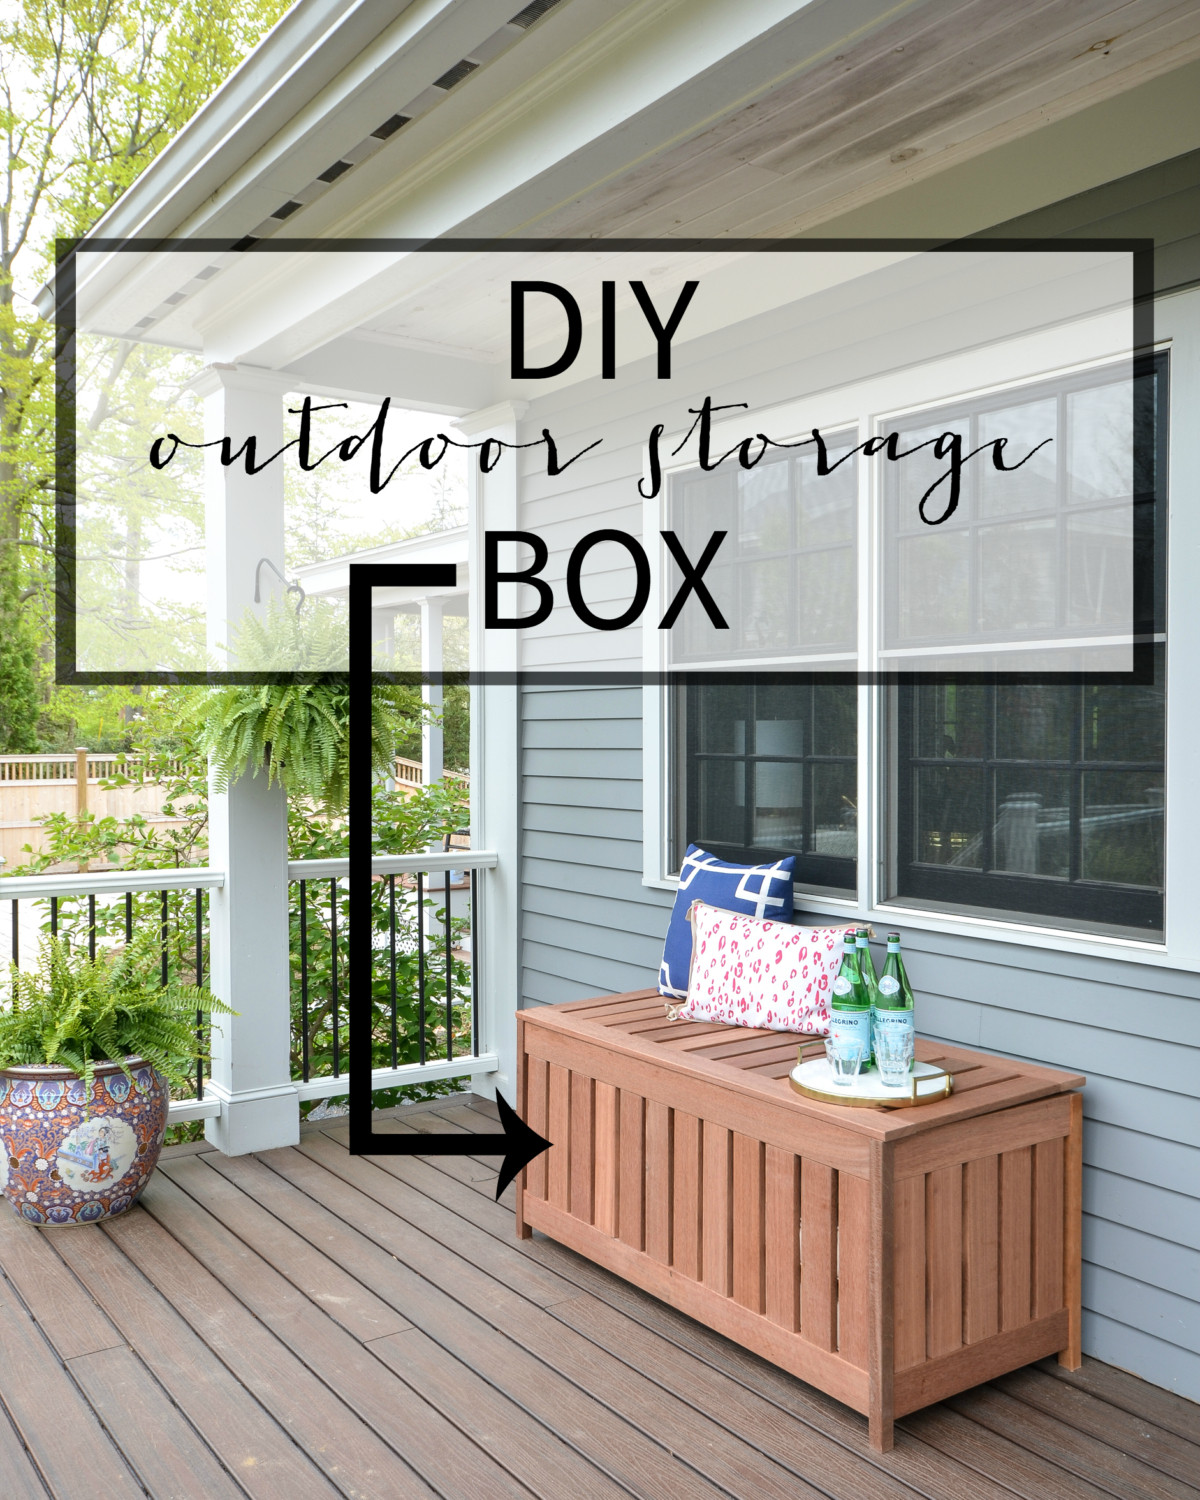 DIY Deck Boxes
 DIY Outdoor Storage Box The Chronicles of Home